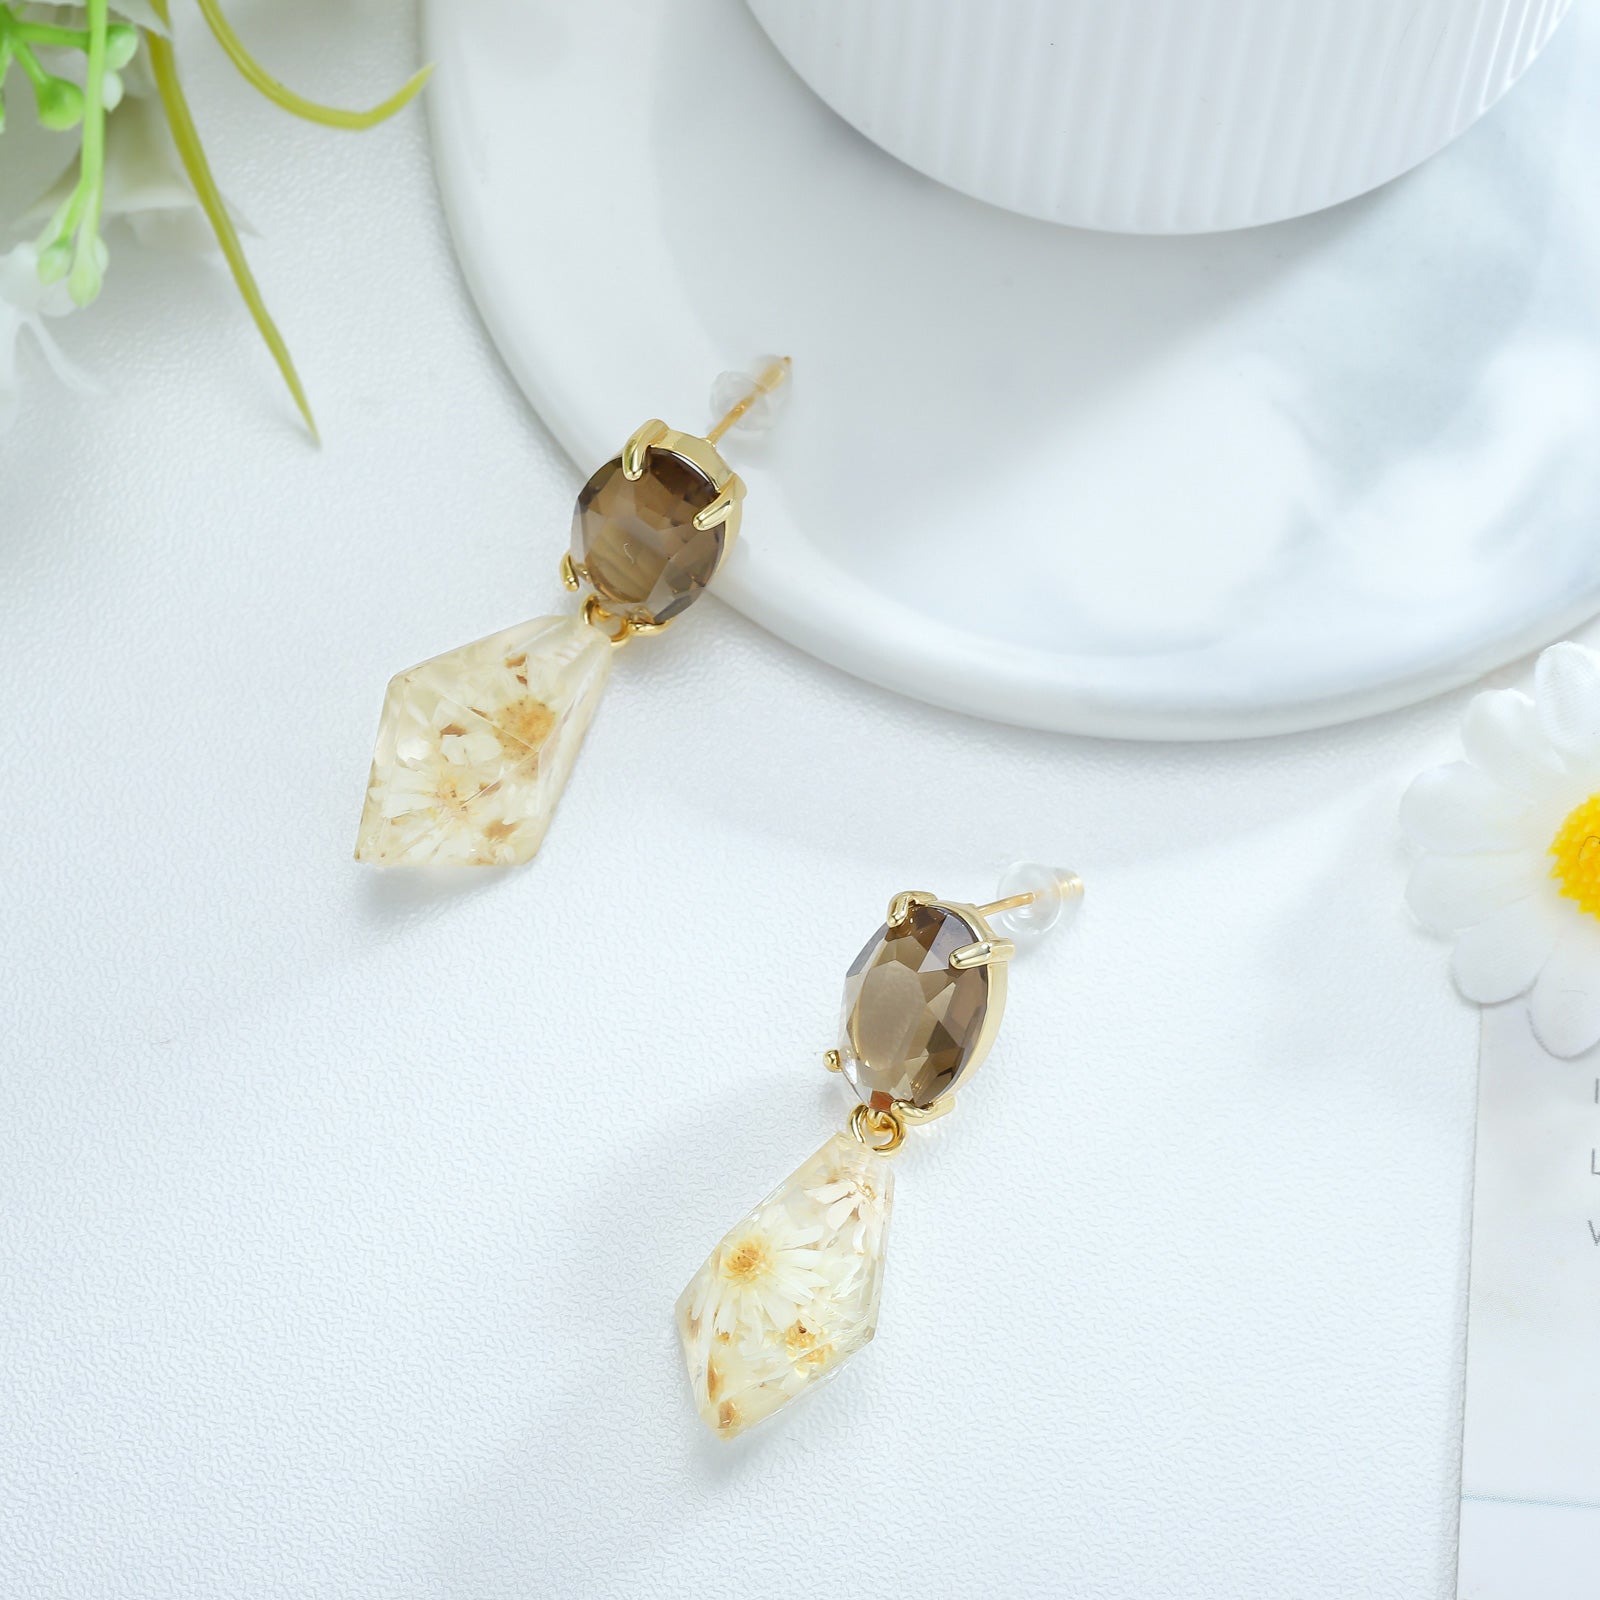 Marigold Resin Earrings Anniversary Jewelry Gifts